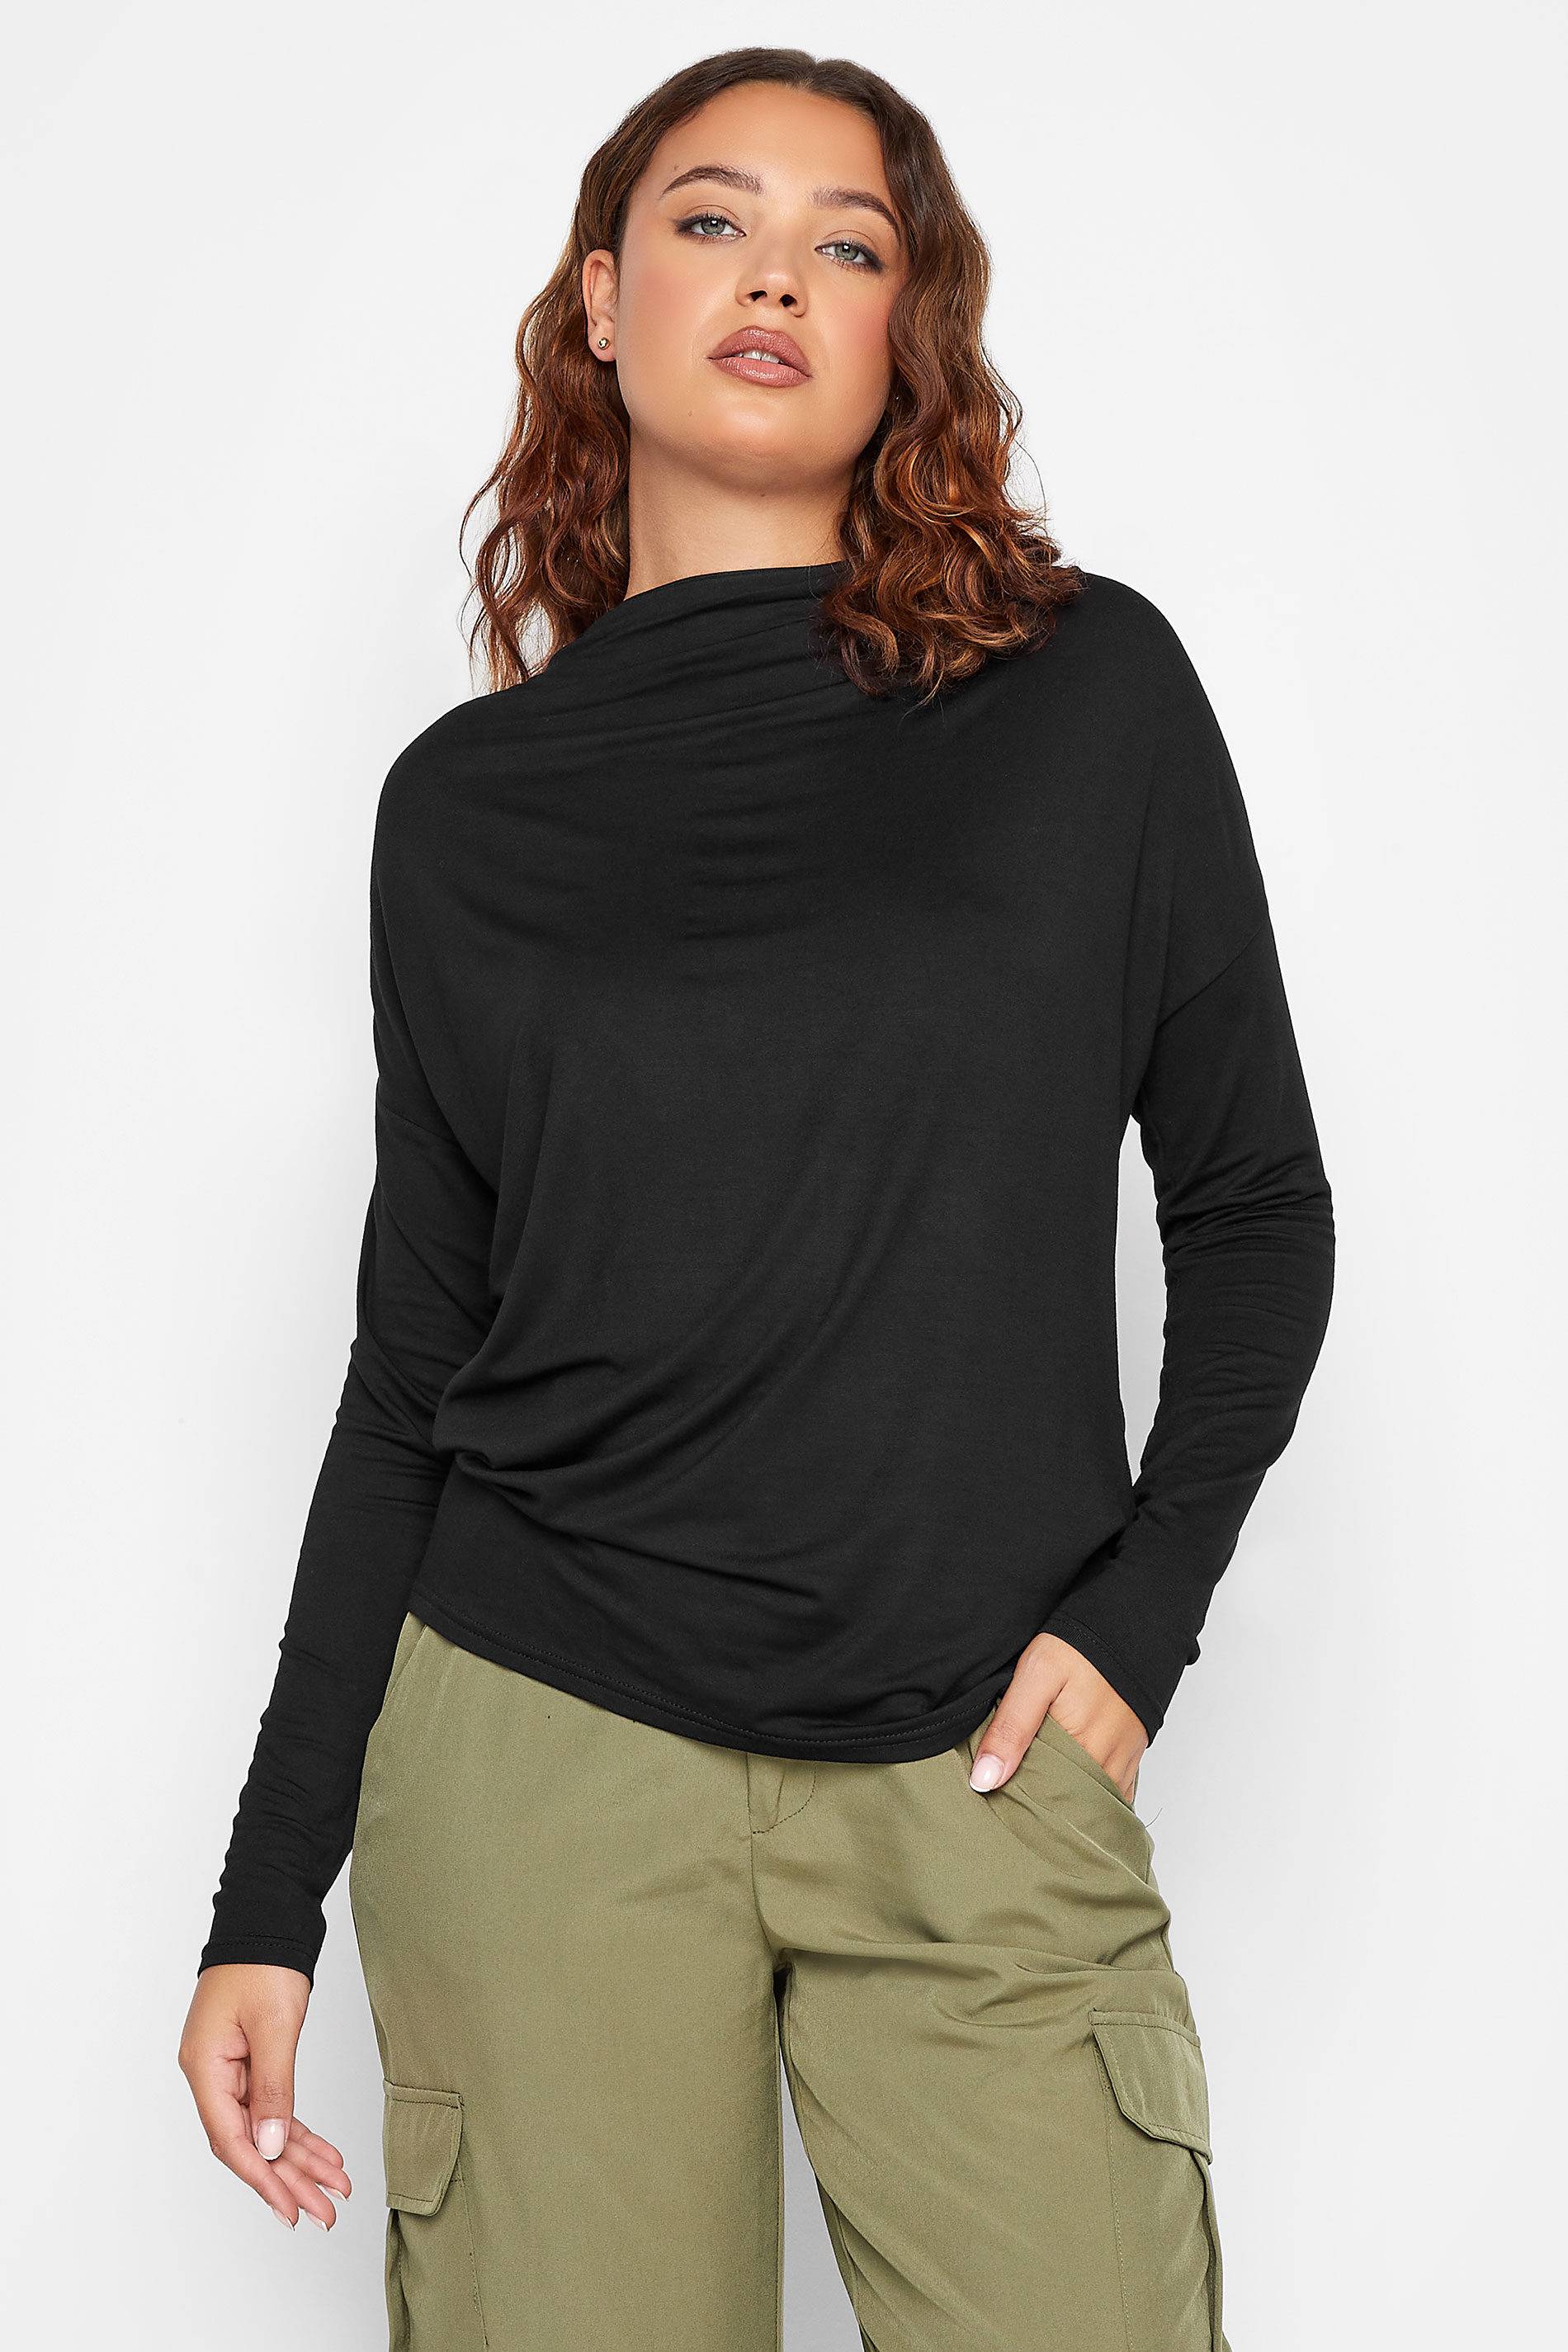 LTS Tall Women's Black Ruched Neck Top | Long Tall Sally 2